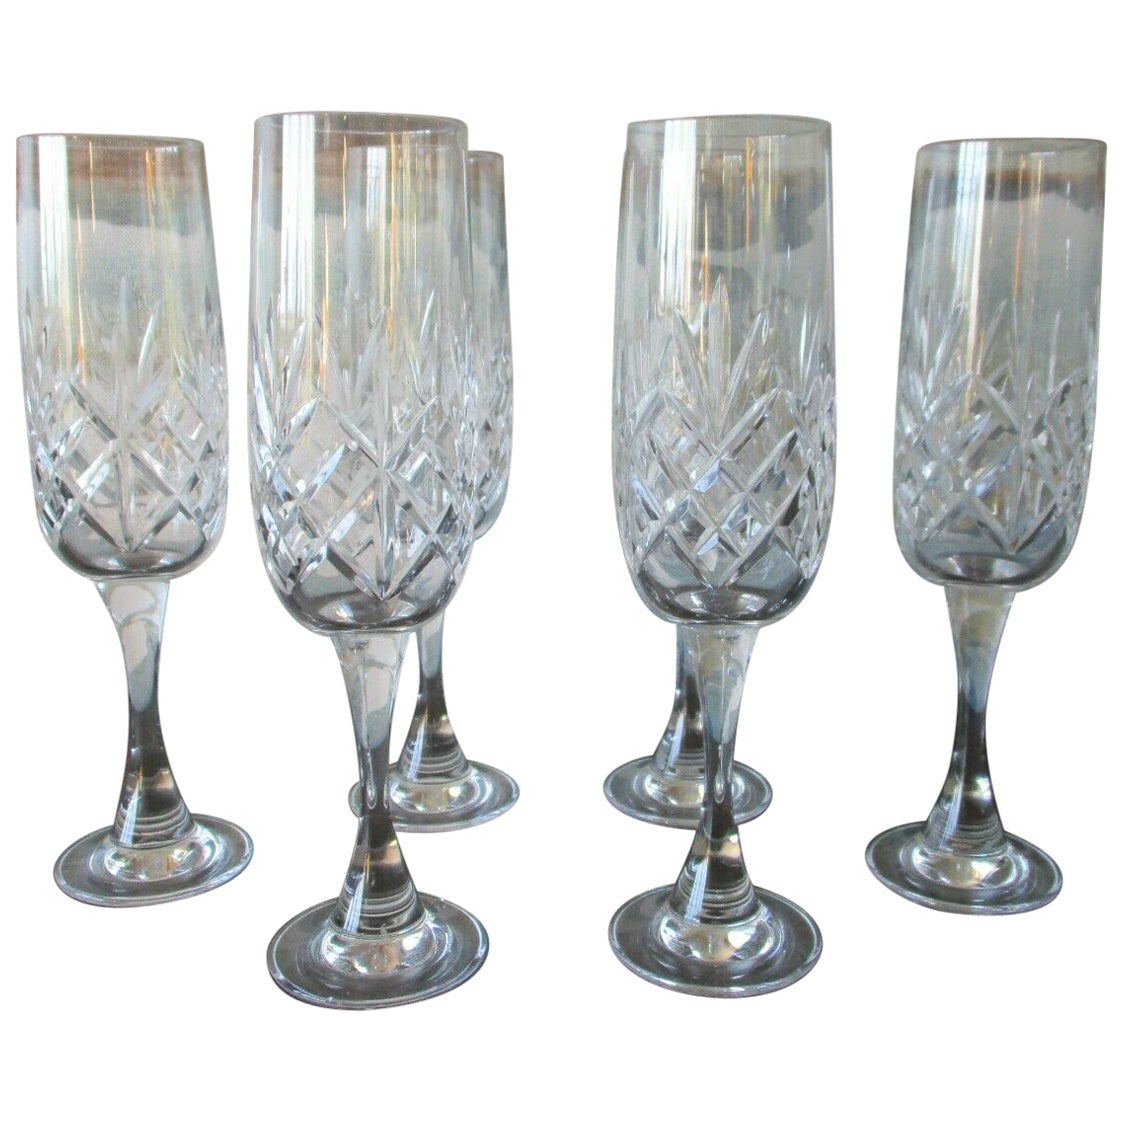 Set of 6 hand-painted champagne flutes